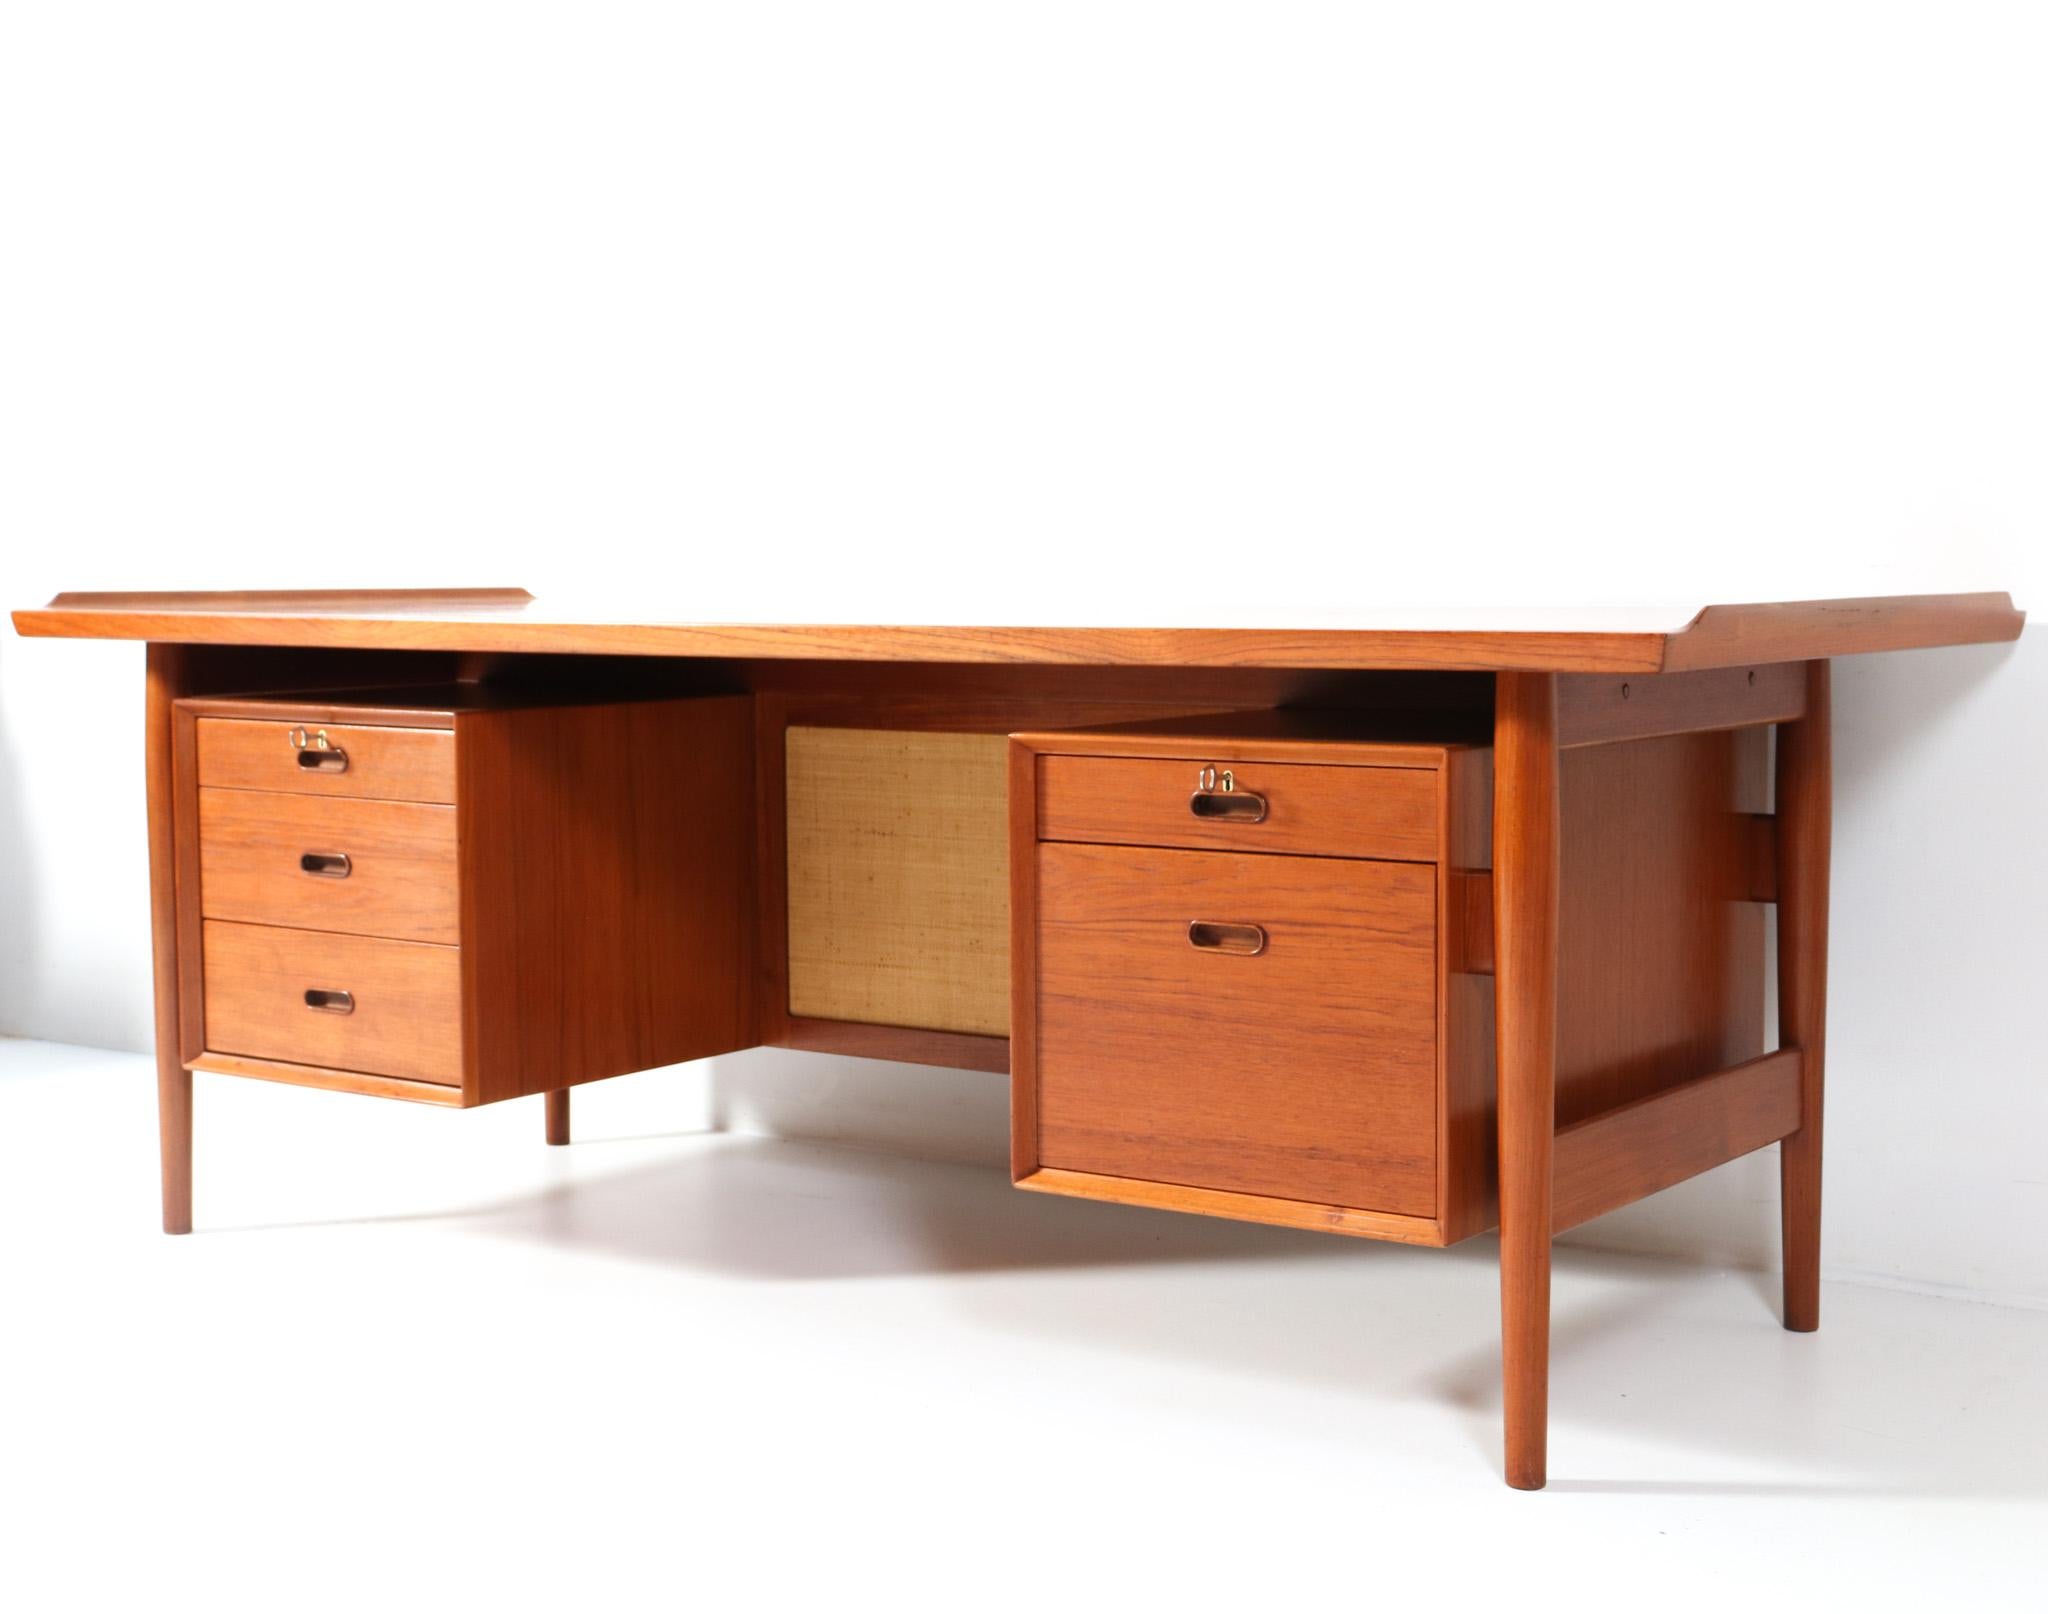 Teak Mid-Century Modern Executive Desk 207 by Arne Vodder for Sibast, 1960s In Good Condition For Sale In Amsterdam, NL